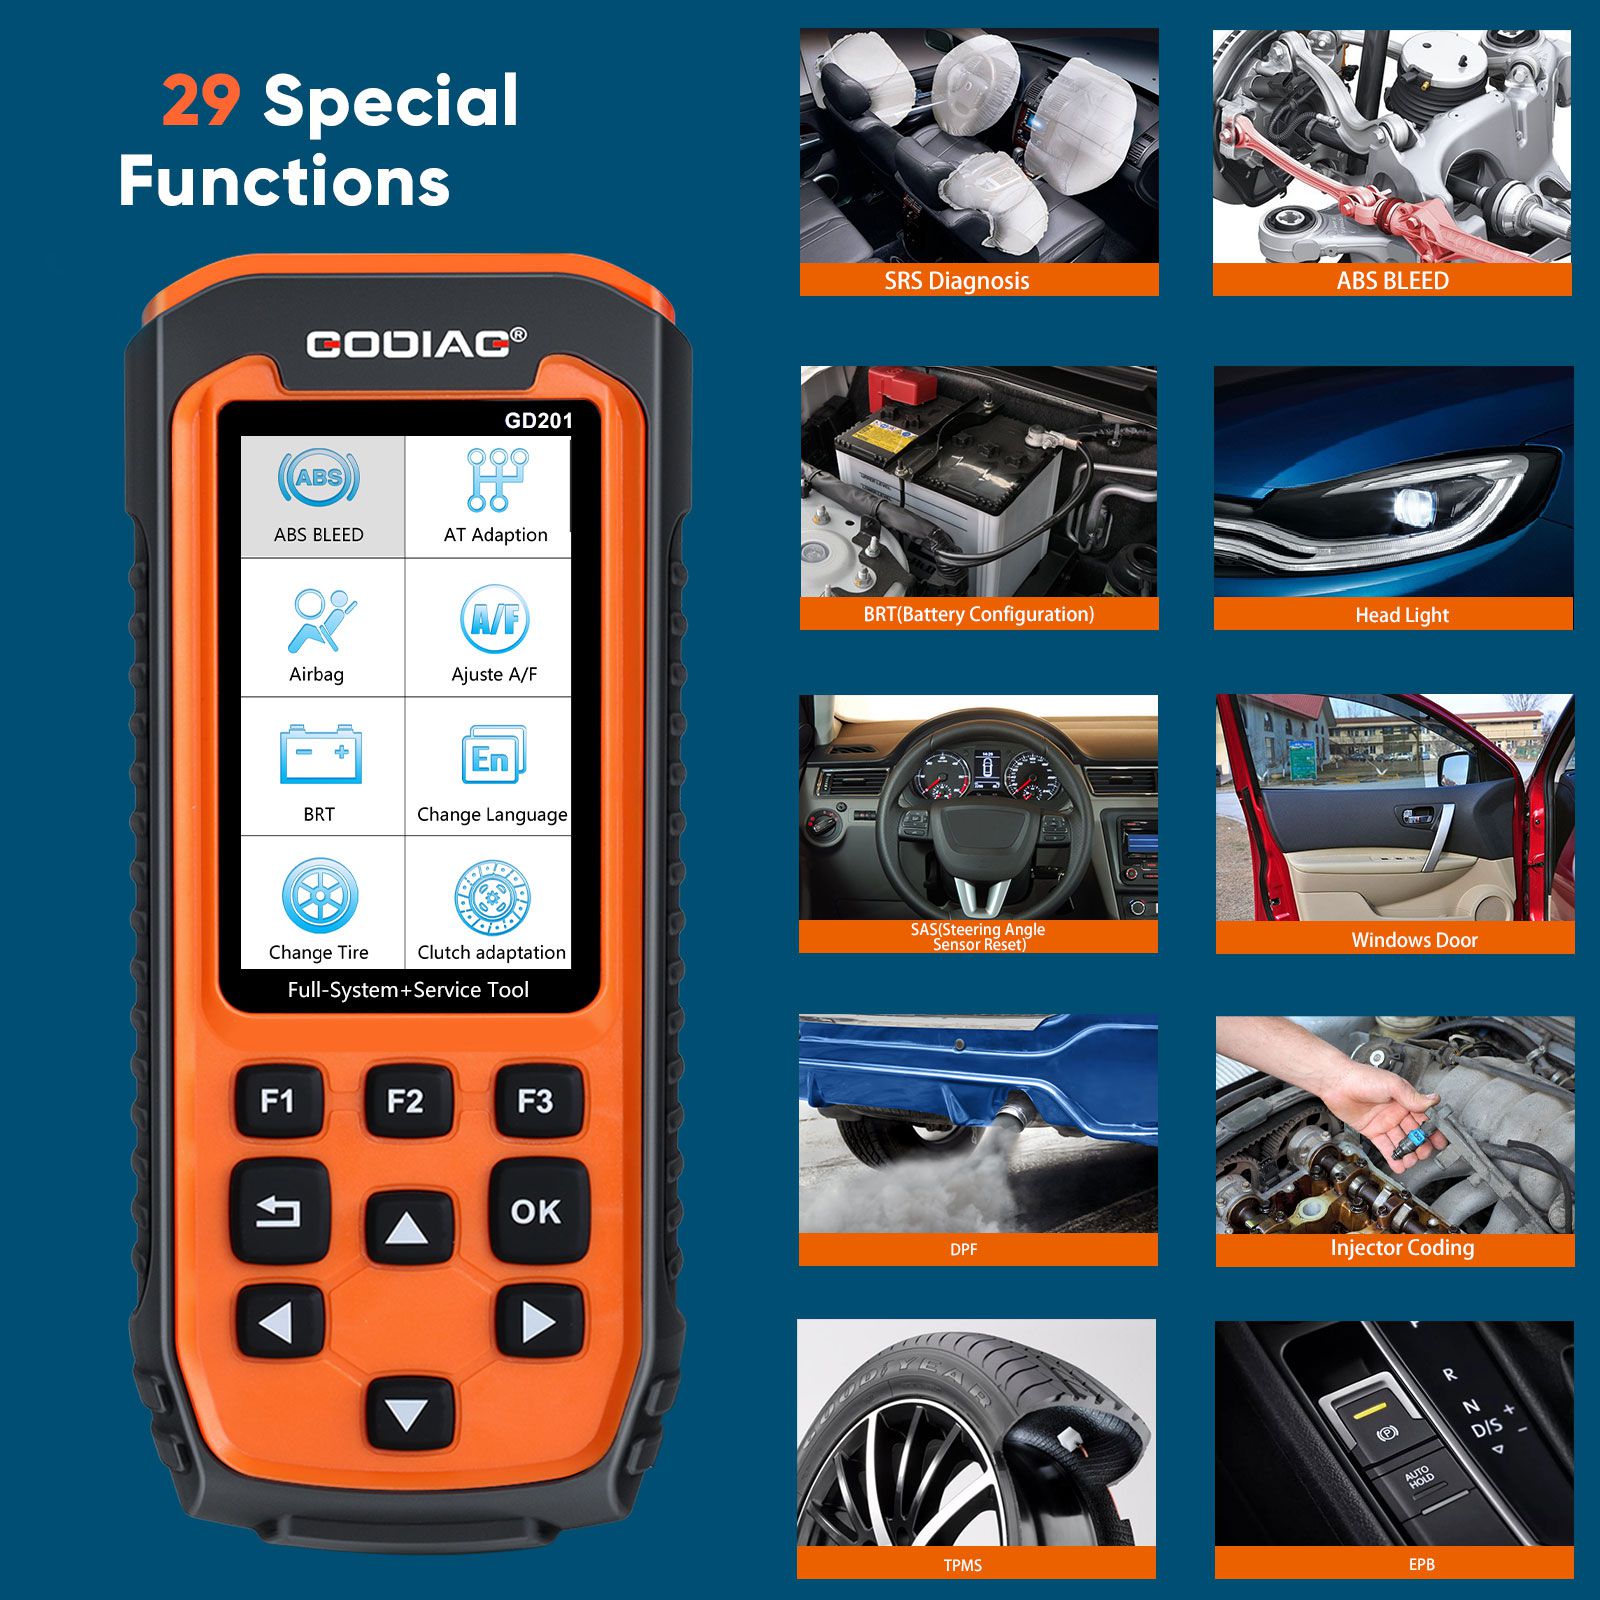 GODIAG GD201 Professional Full System Diagnostic Tool OBDII Scanner for All-makes  with 29 Service Reset Functions